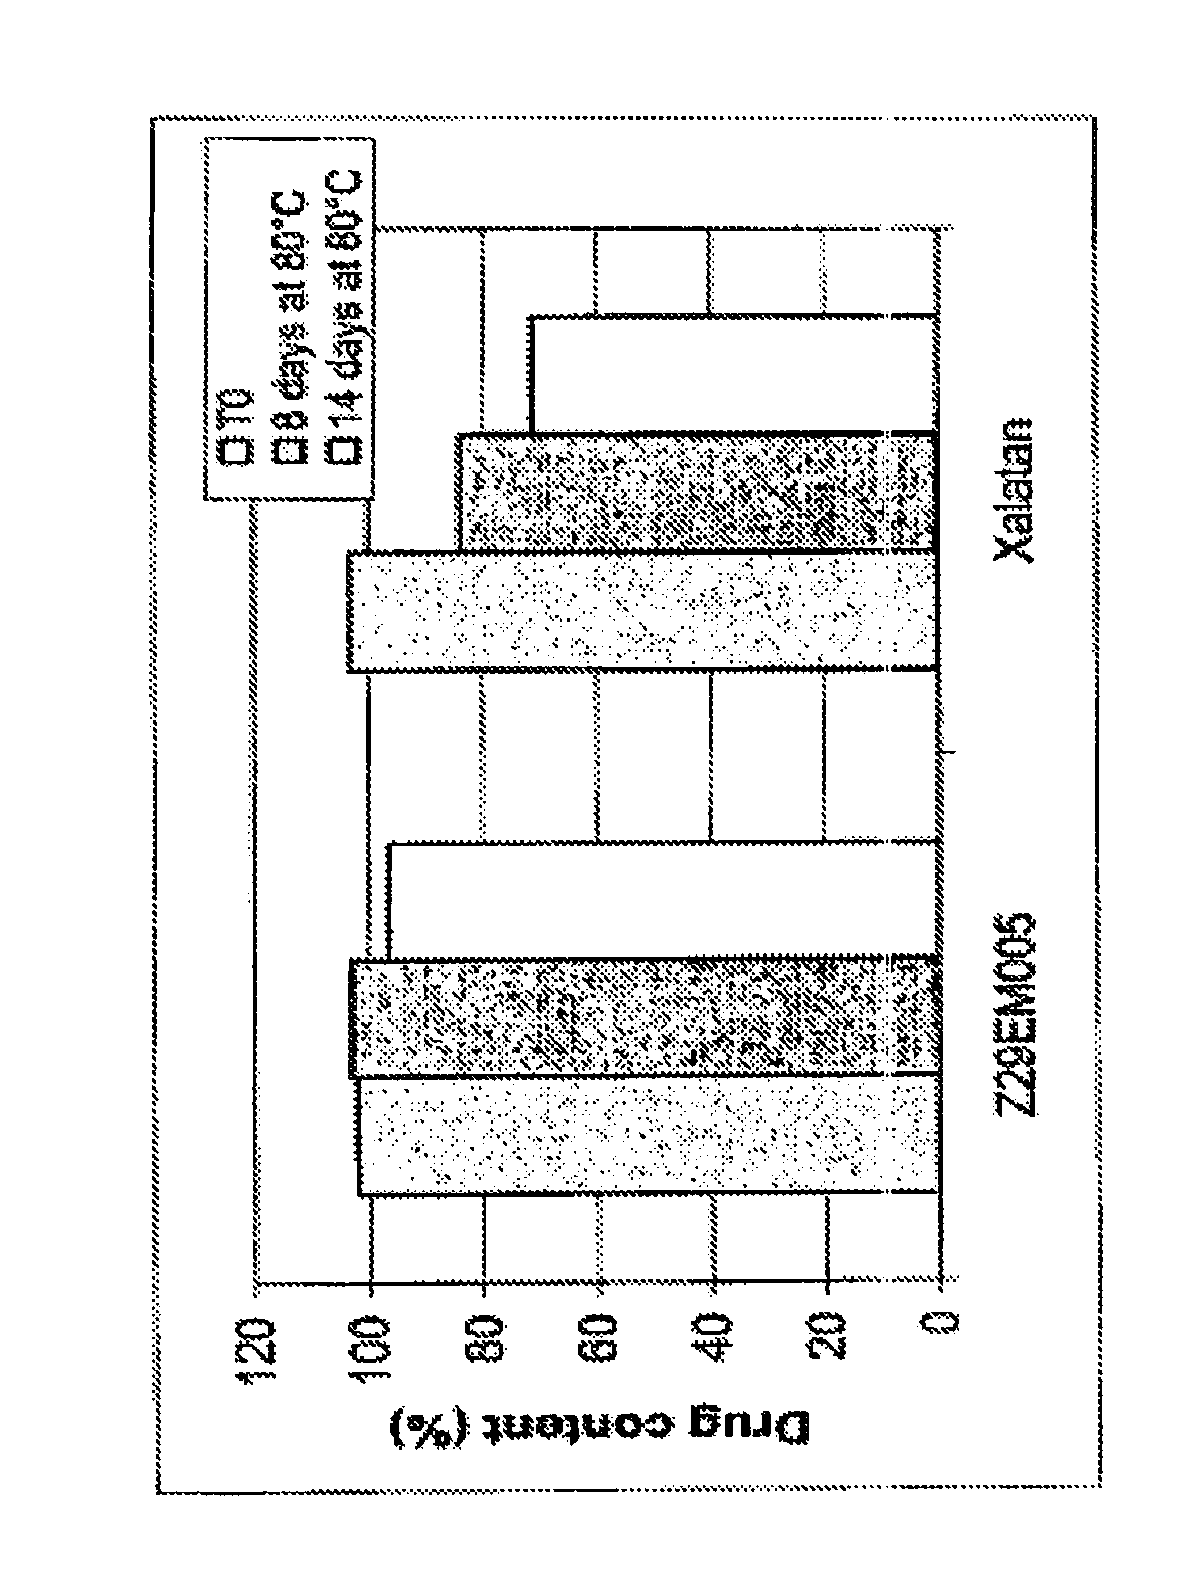 Ophthalmic emulsions containing prostaglandins